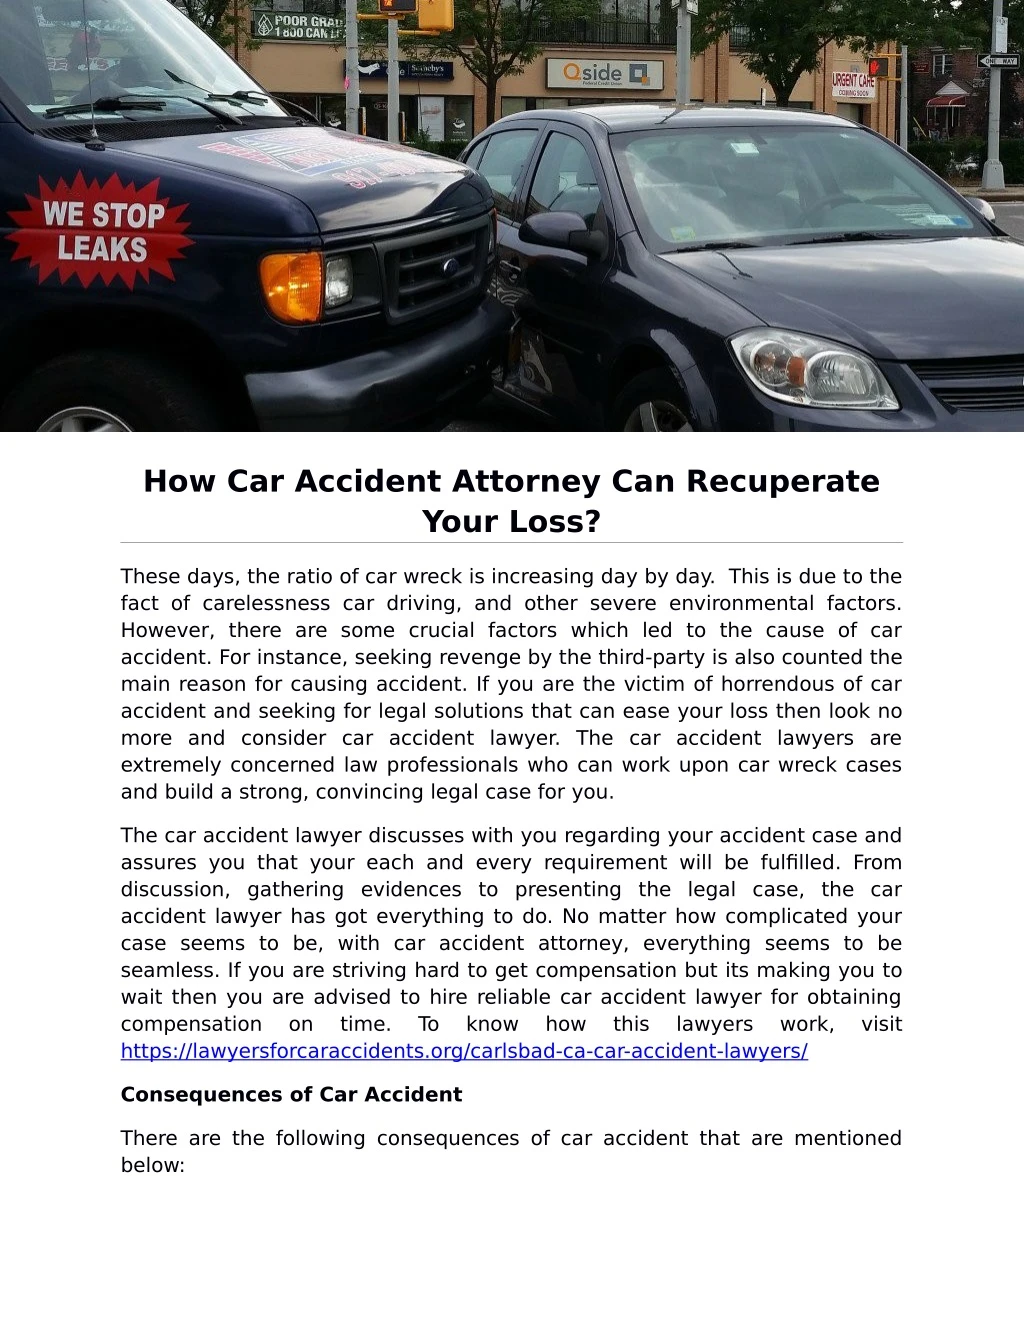 how car accident attorney can recuperate your loss